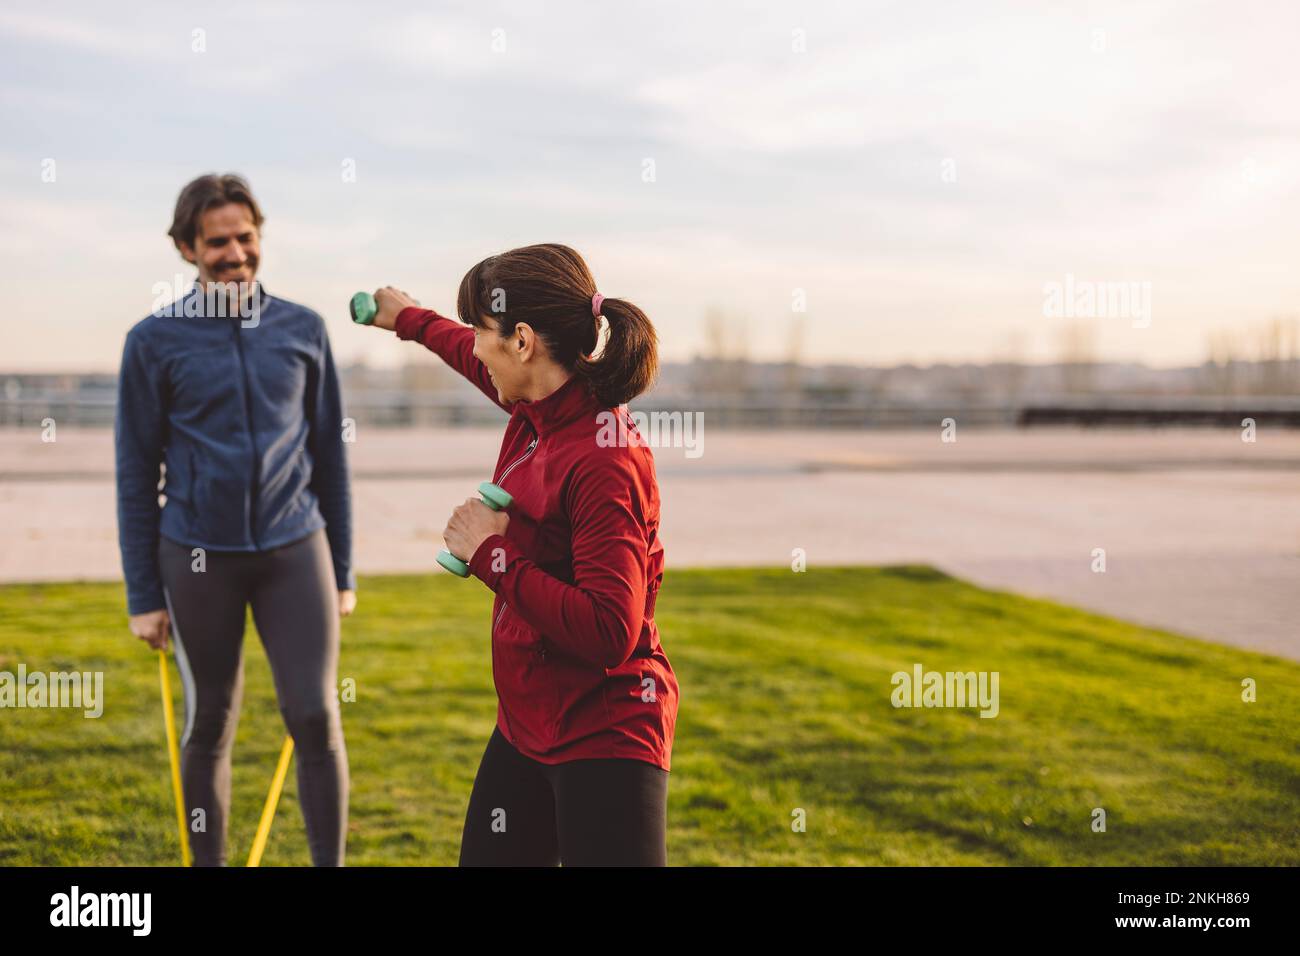 Playful mature woman holding dumbbells exercising with man at park Stock Photo